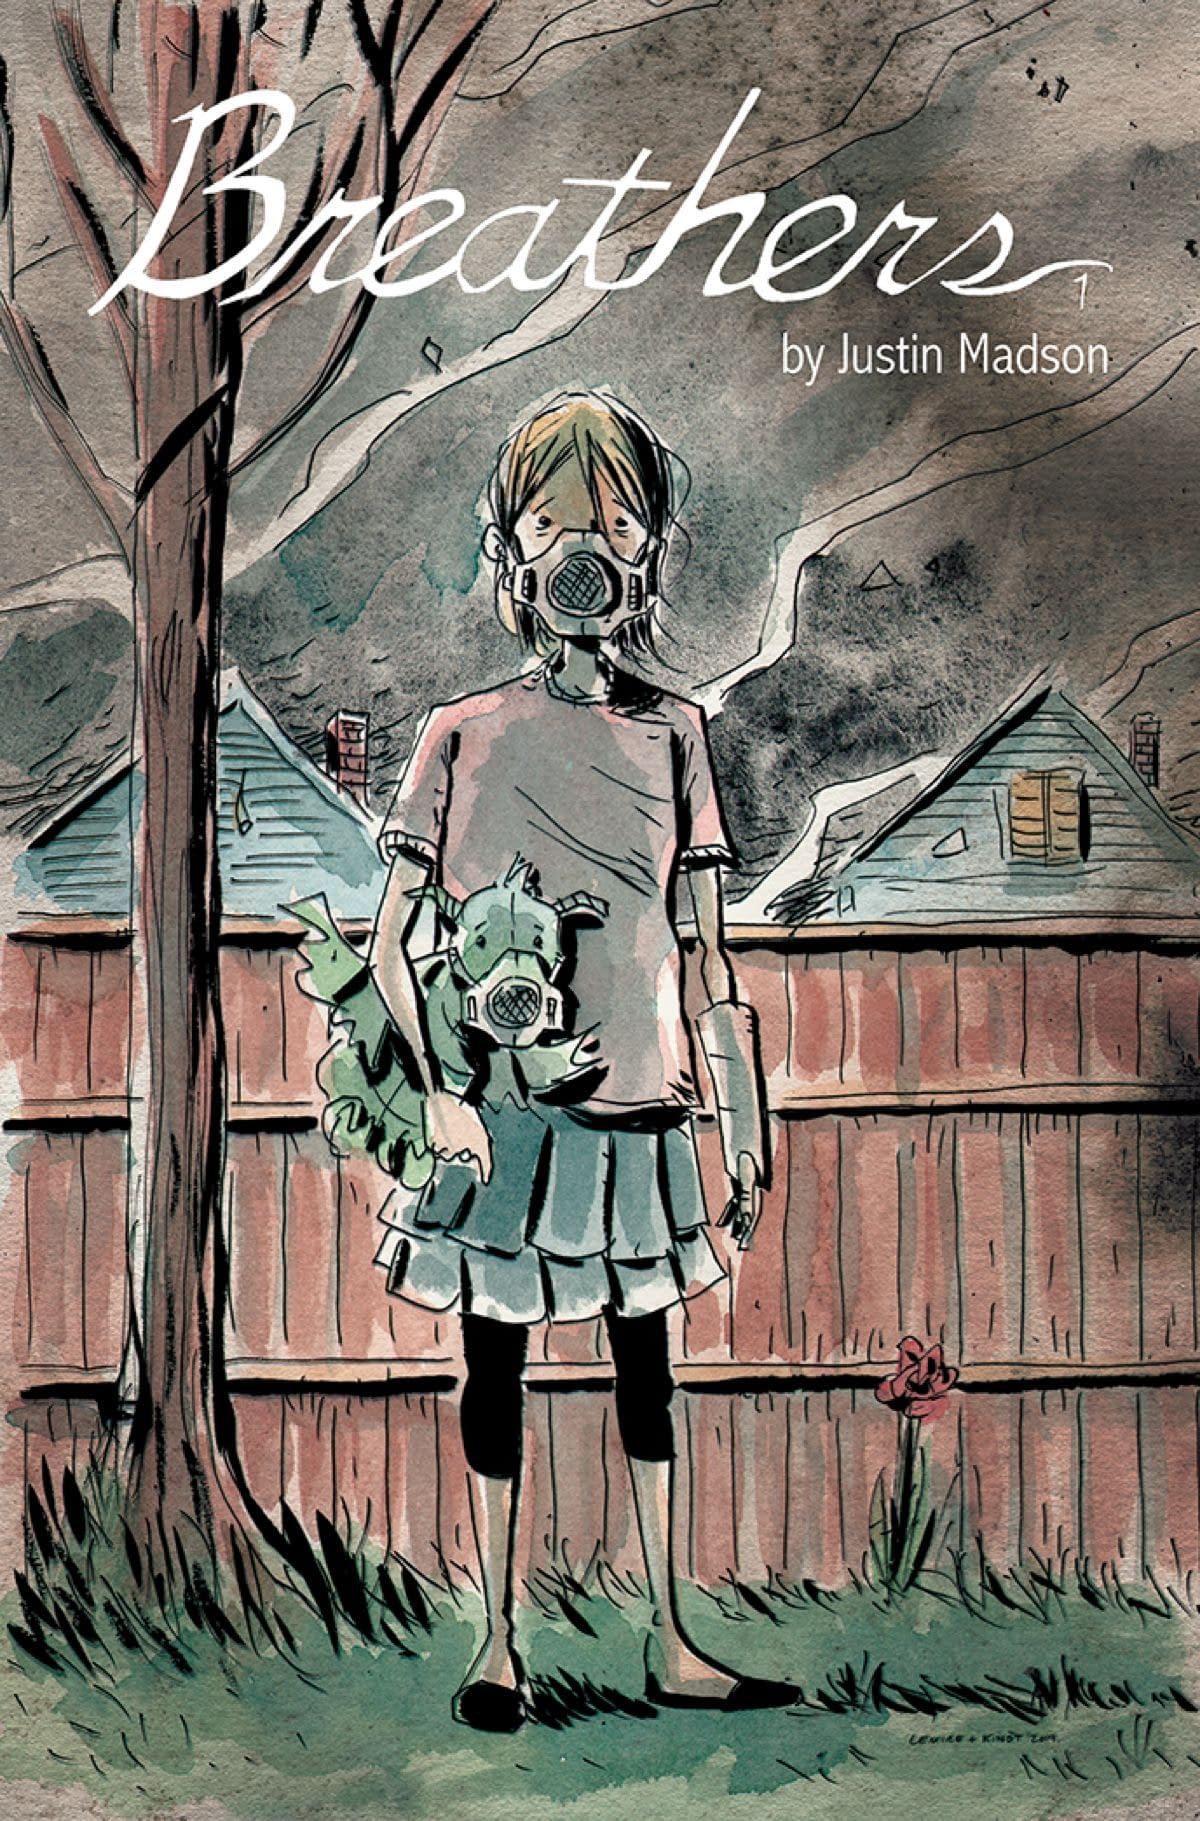 It's Alive! Launches IndieGoGo to Publish Justin Madson's Breathers